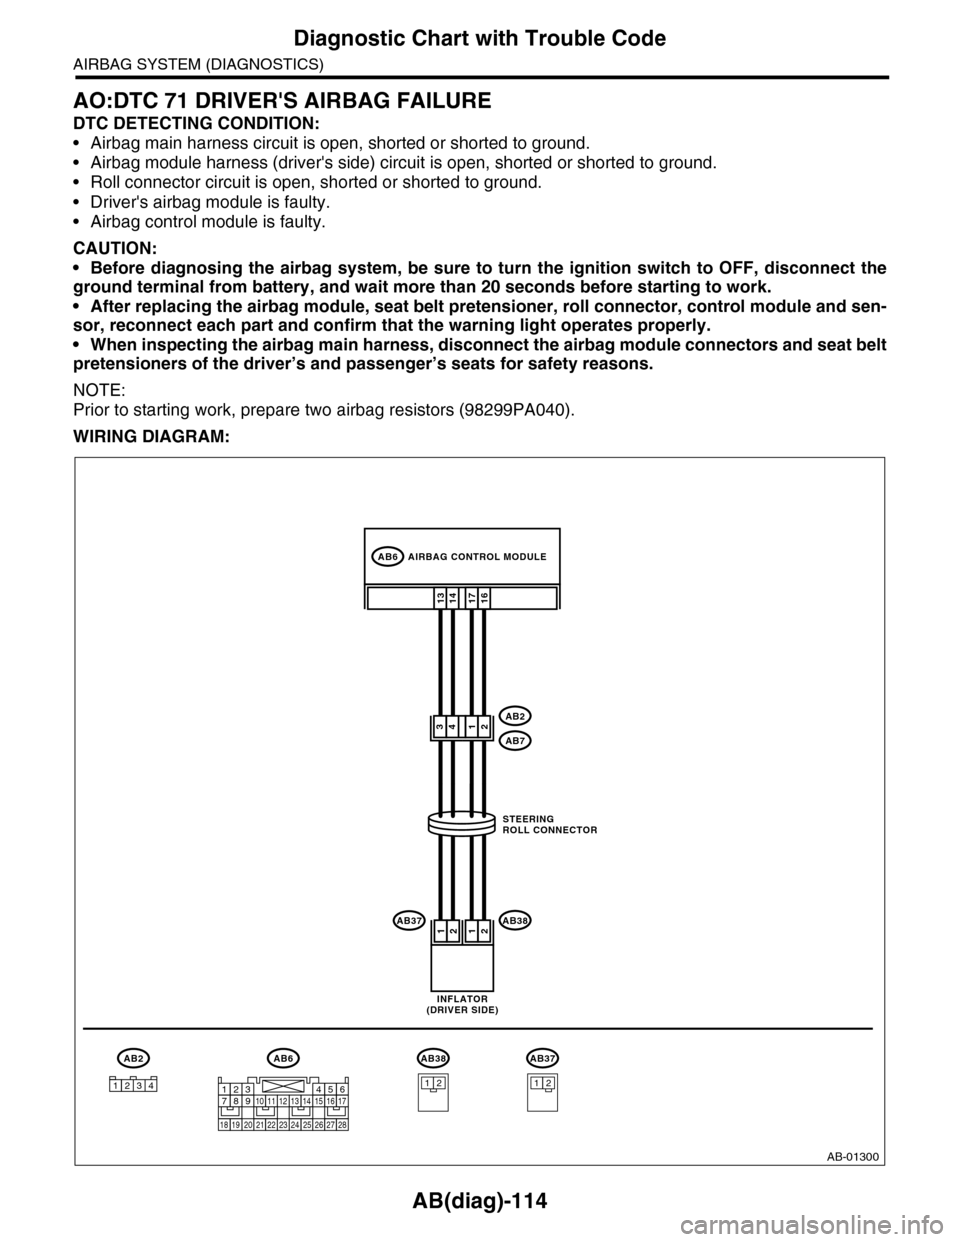 SUBARU TRIBECA 2009 1.G Service Service Manual AB(diag)-114
Diagnostic Chart with Trouble Code
AIRBAG SYSTEM (DIAGNOSTICS)
AO:DTC 71 DRIVERS AIRBAG FAILURE
DTC DETECTING CONDITION:
•Airbag main harness circuit is open, shorted or shorted to gro